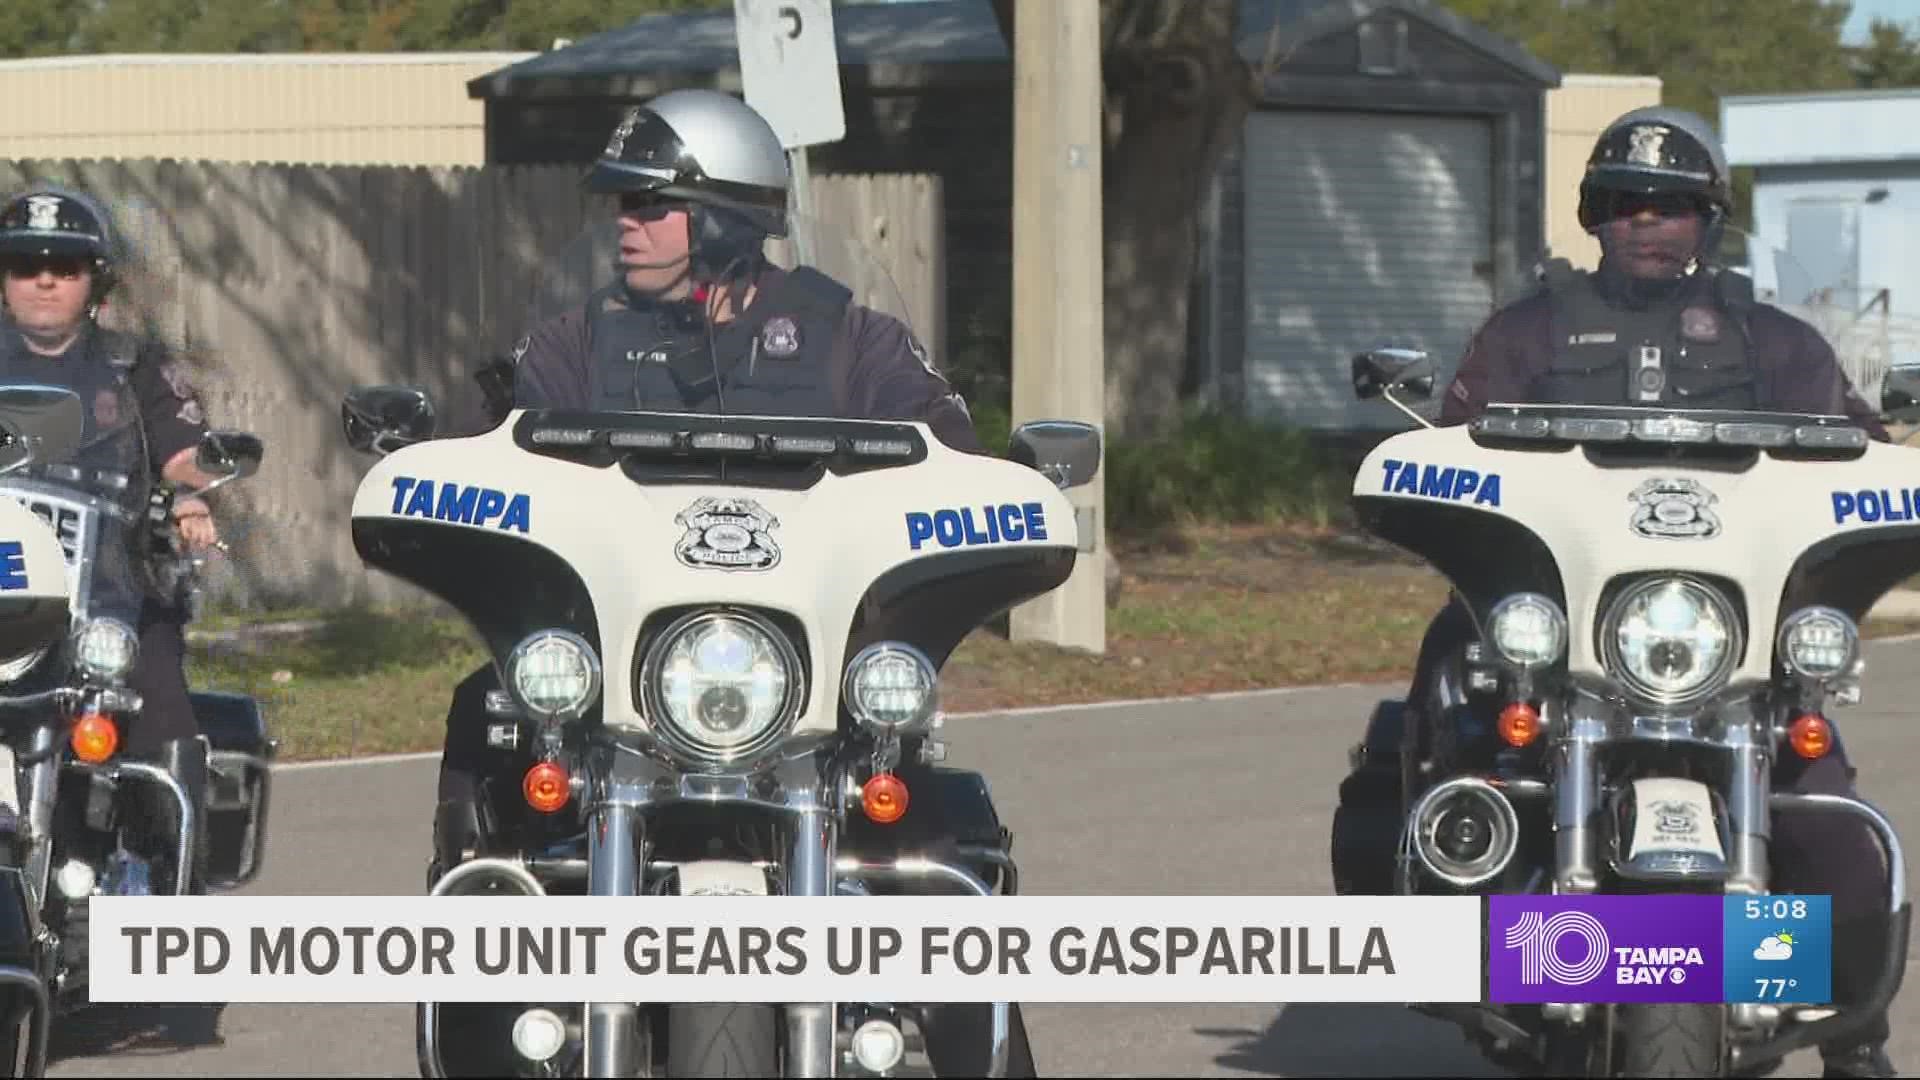 Large crowds and alcohol can be a challenge for law enforcement during Gasparilla, but the Tampa Police's motor unit said they're ready.